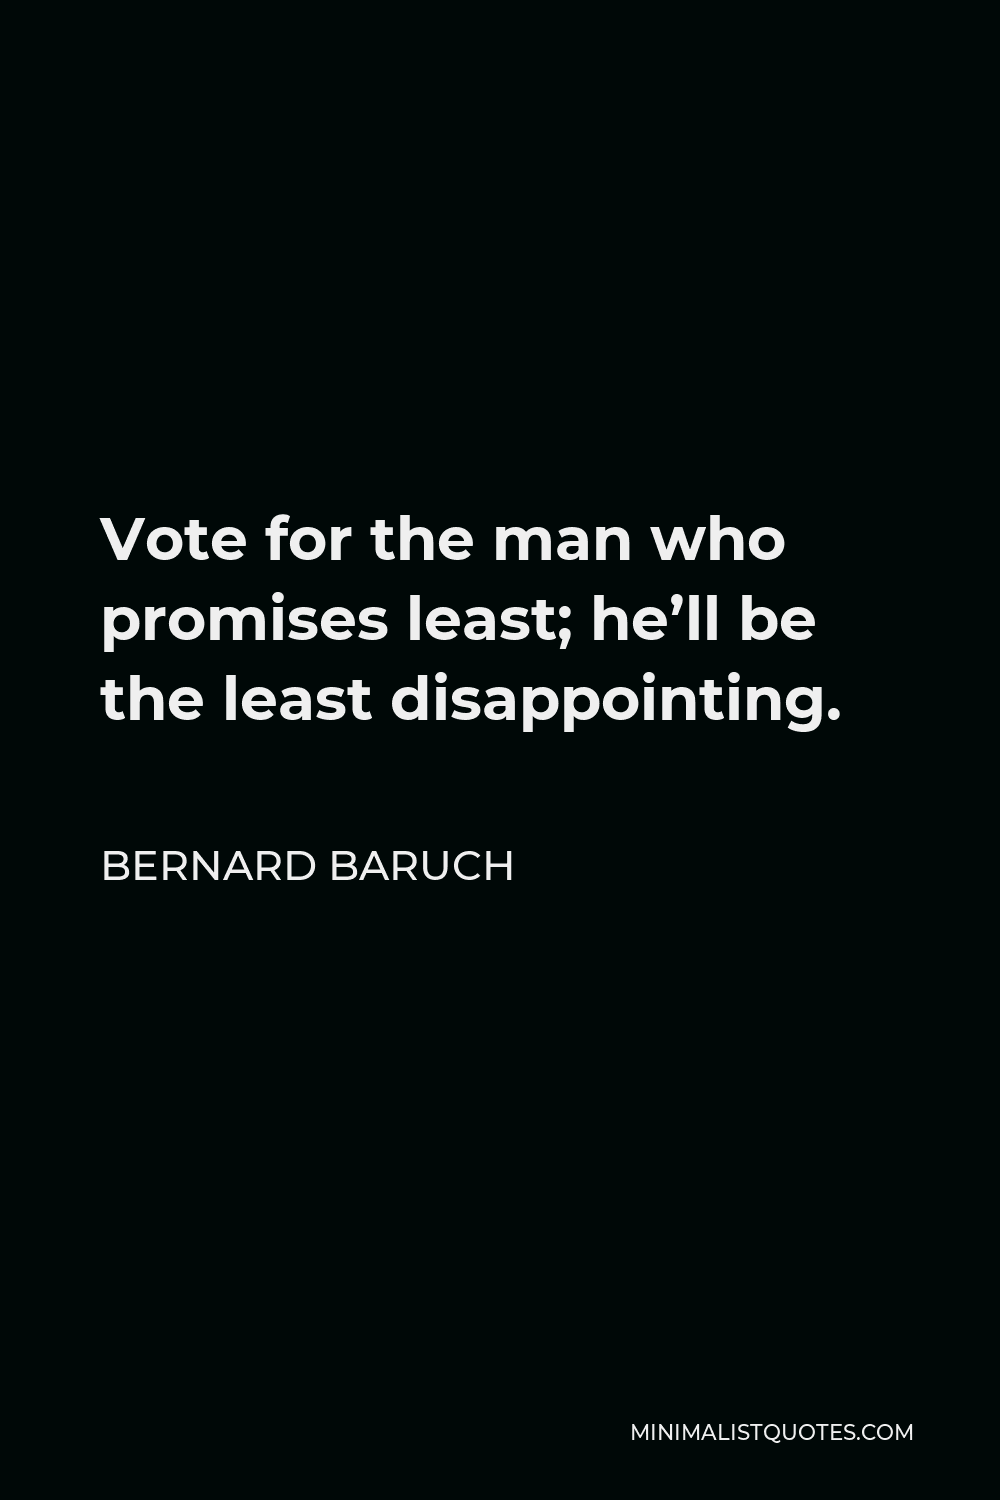 Bernard Baruch Quote - Vote for the man who promises least; he’ll be the least disappointing.